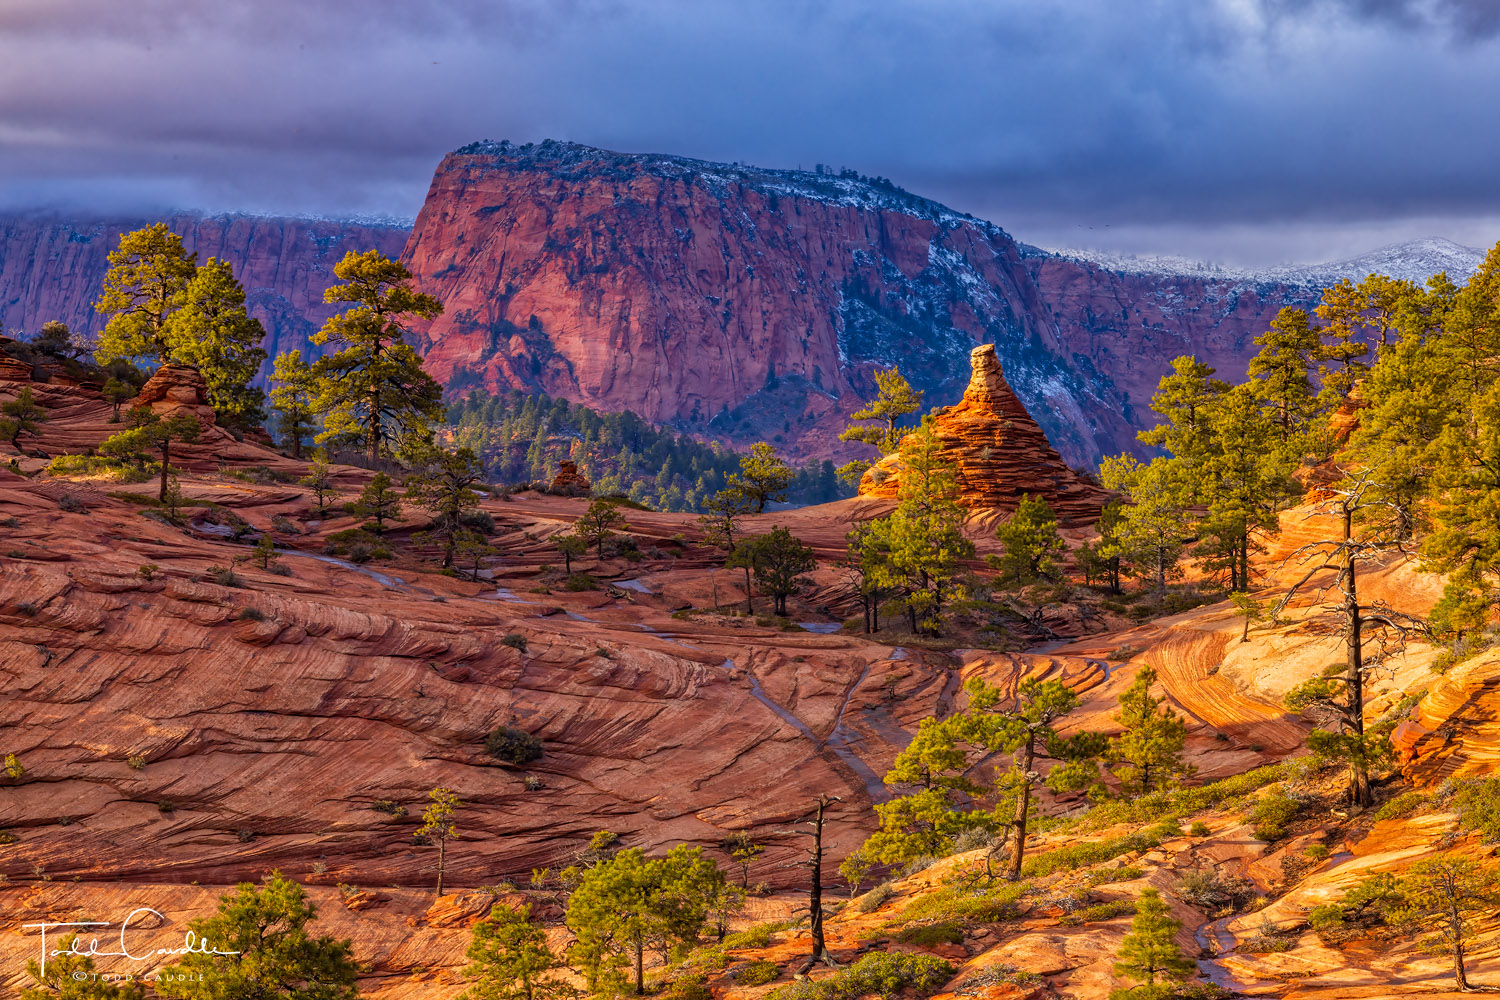 Clouds envelope the highest mesas of Kolob Terrace while sandstone hoodoos bask in the glow of a Christmas Day sunset.